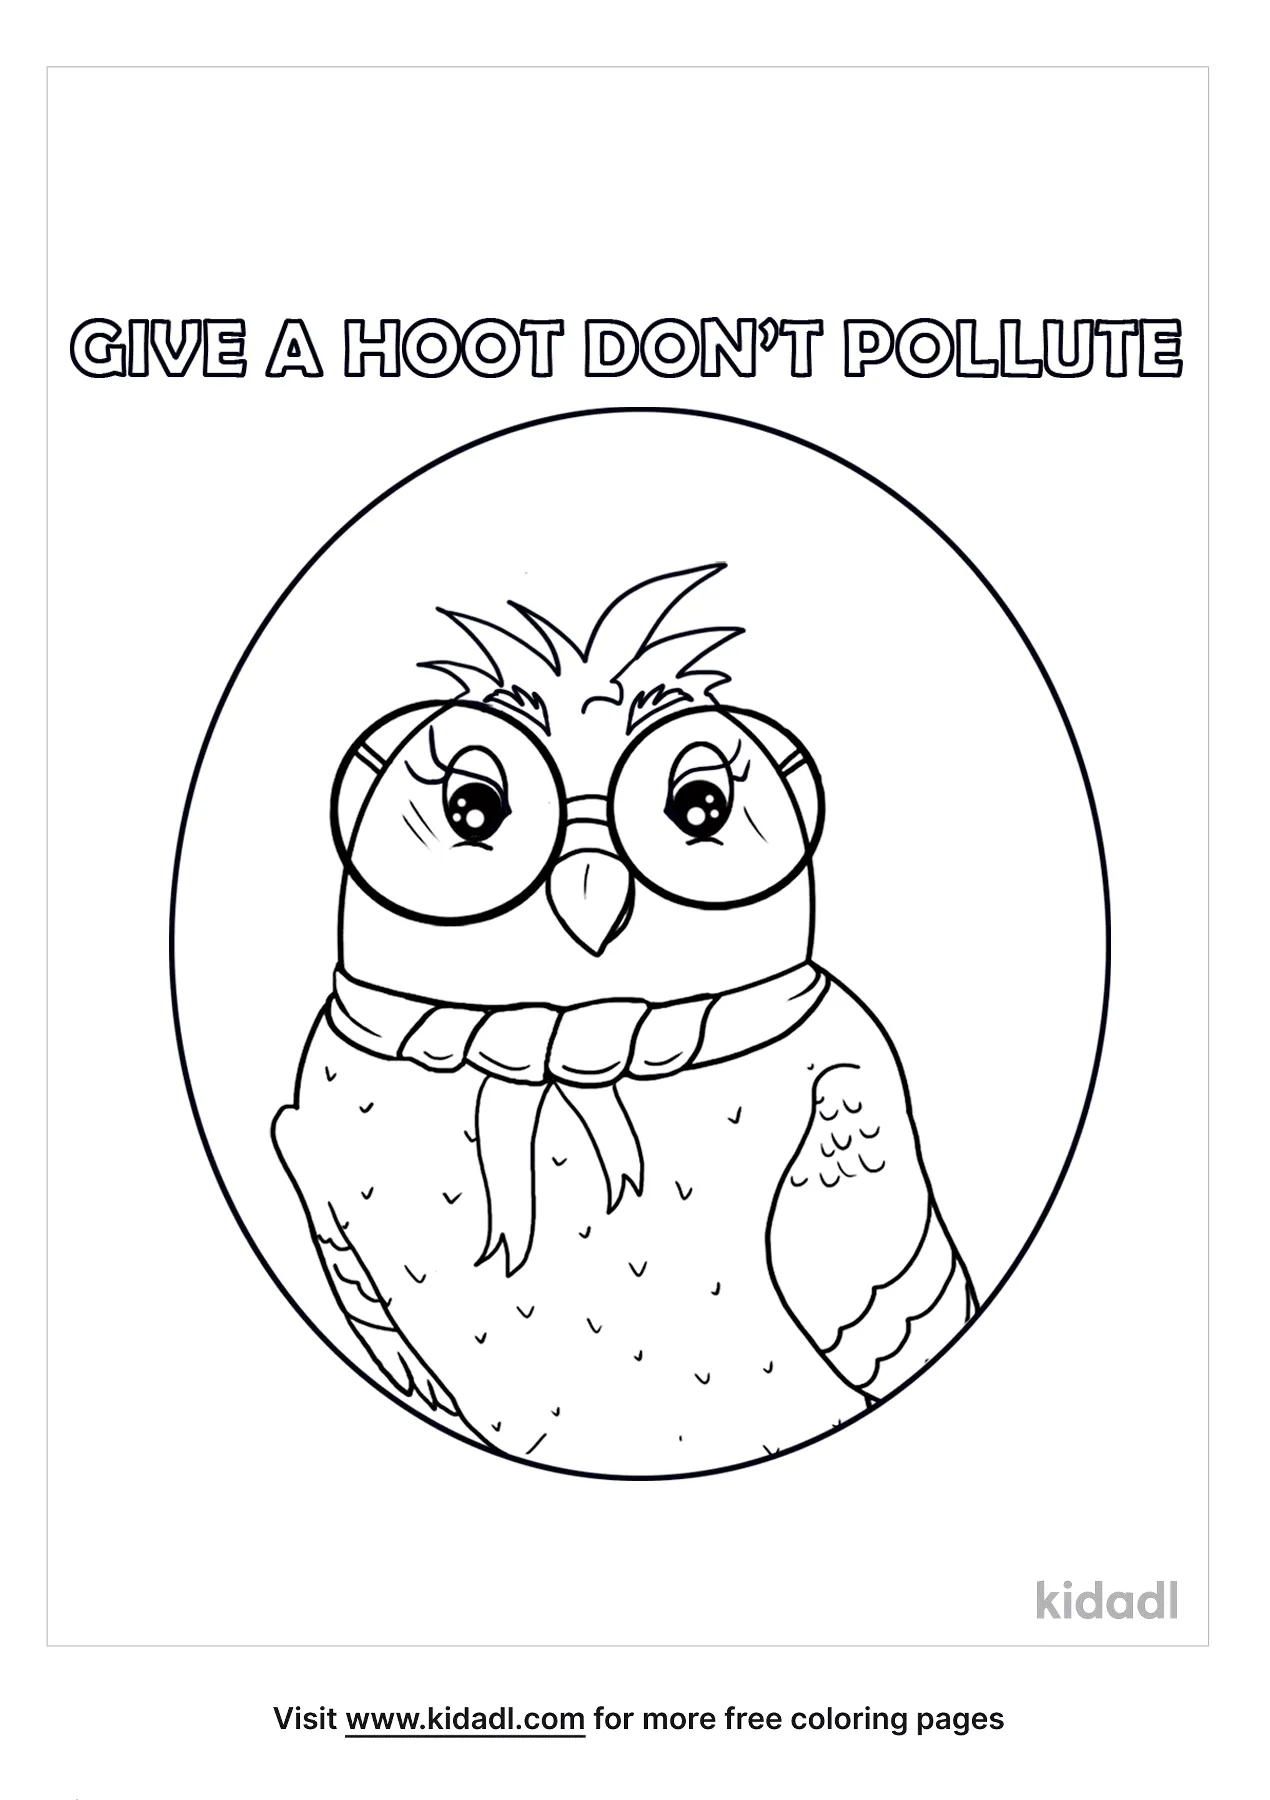 Give A Hoot Don't Pollute Coloring Page